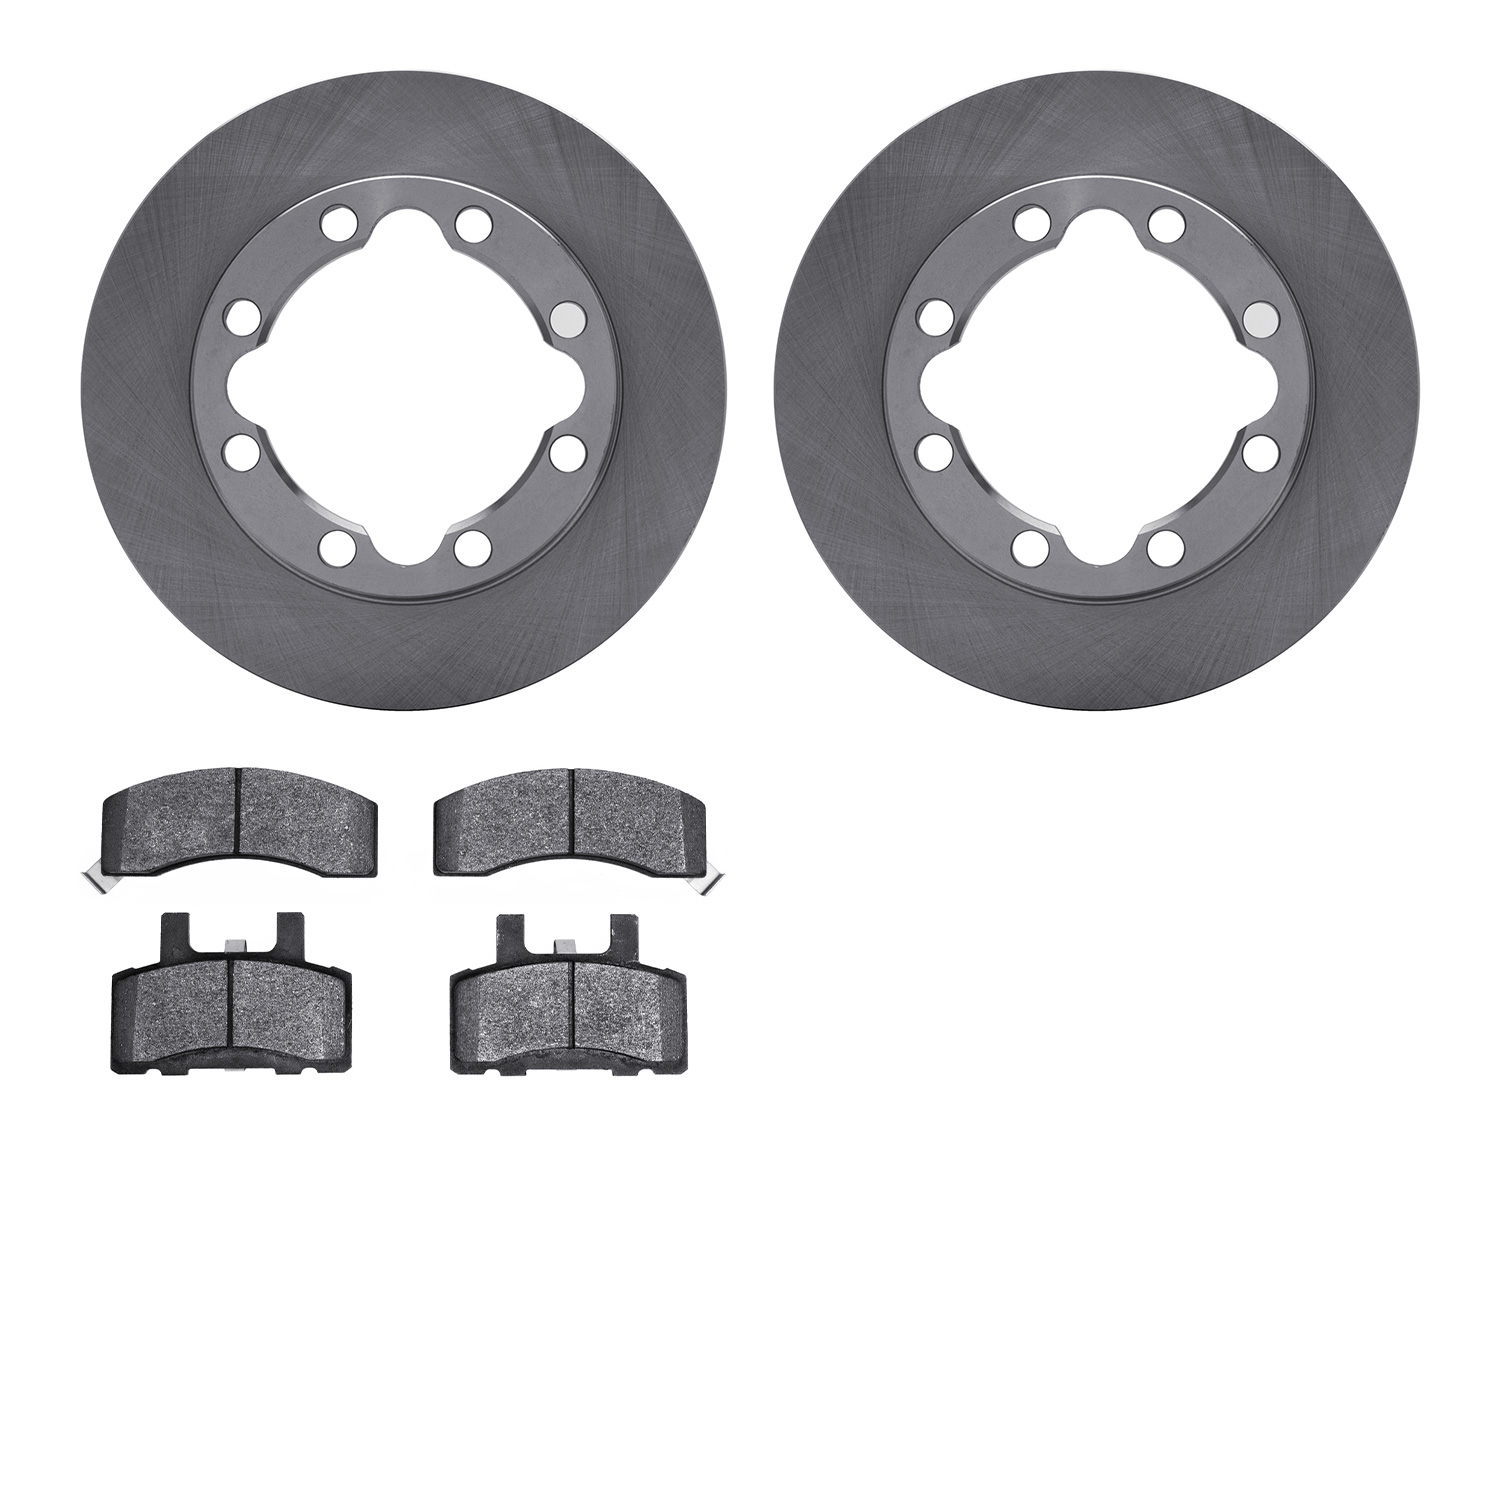 6402-40001 Brake Rotors with Ultimate-Duty Brake Pads, 1988-2000 Multiple Makes/Models, Position: Front